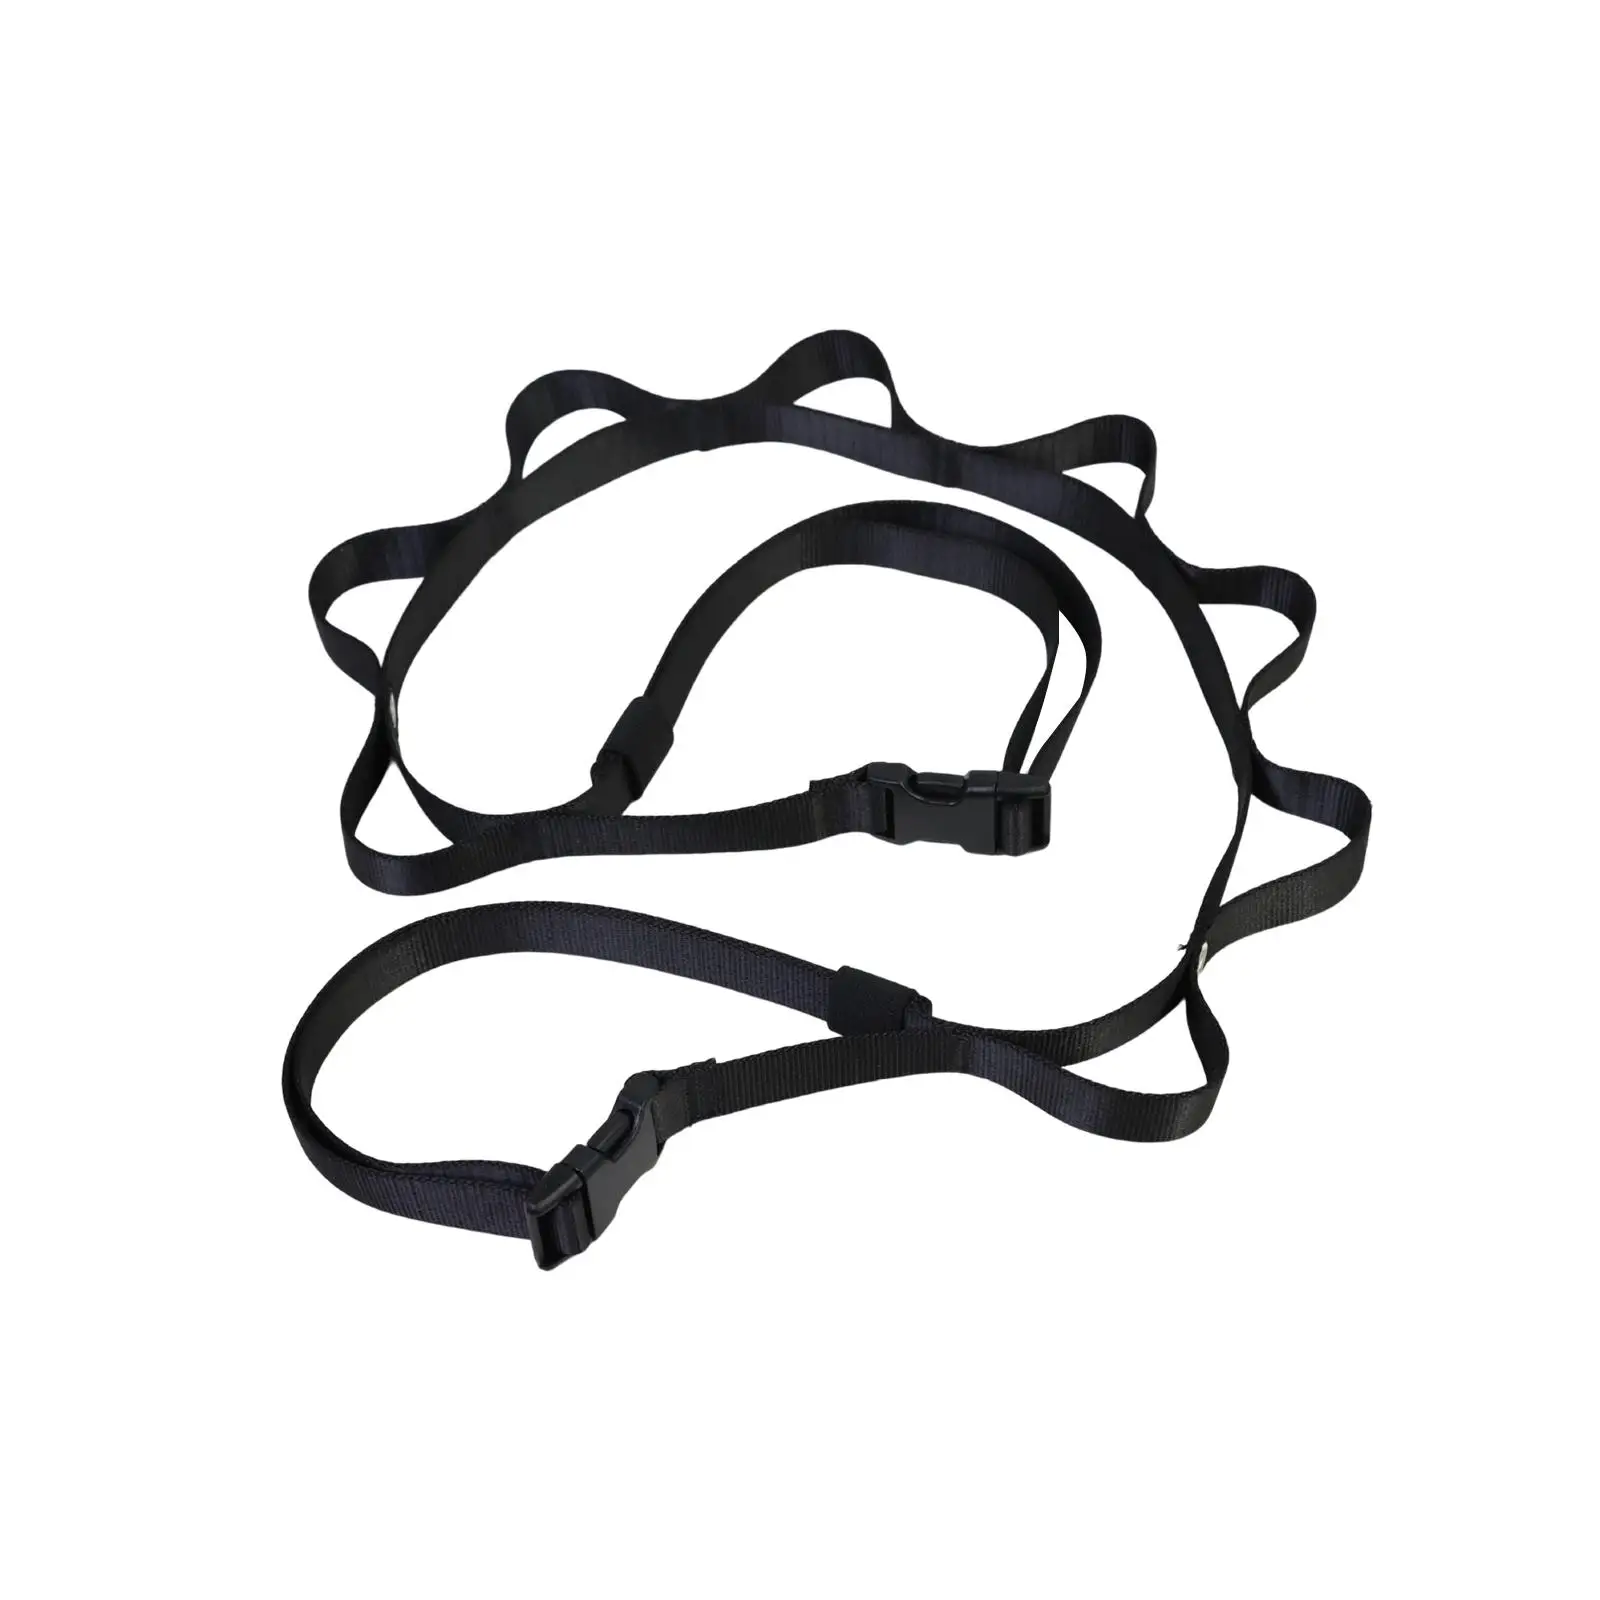 Car Clothesline Cargo Straps Hanging Rope Luggage Straps Car Luggage Cord Rope for Camping Travel Motorcycle Trunk Hand Carts